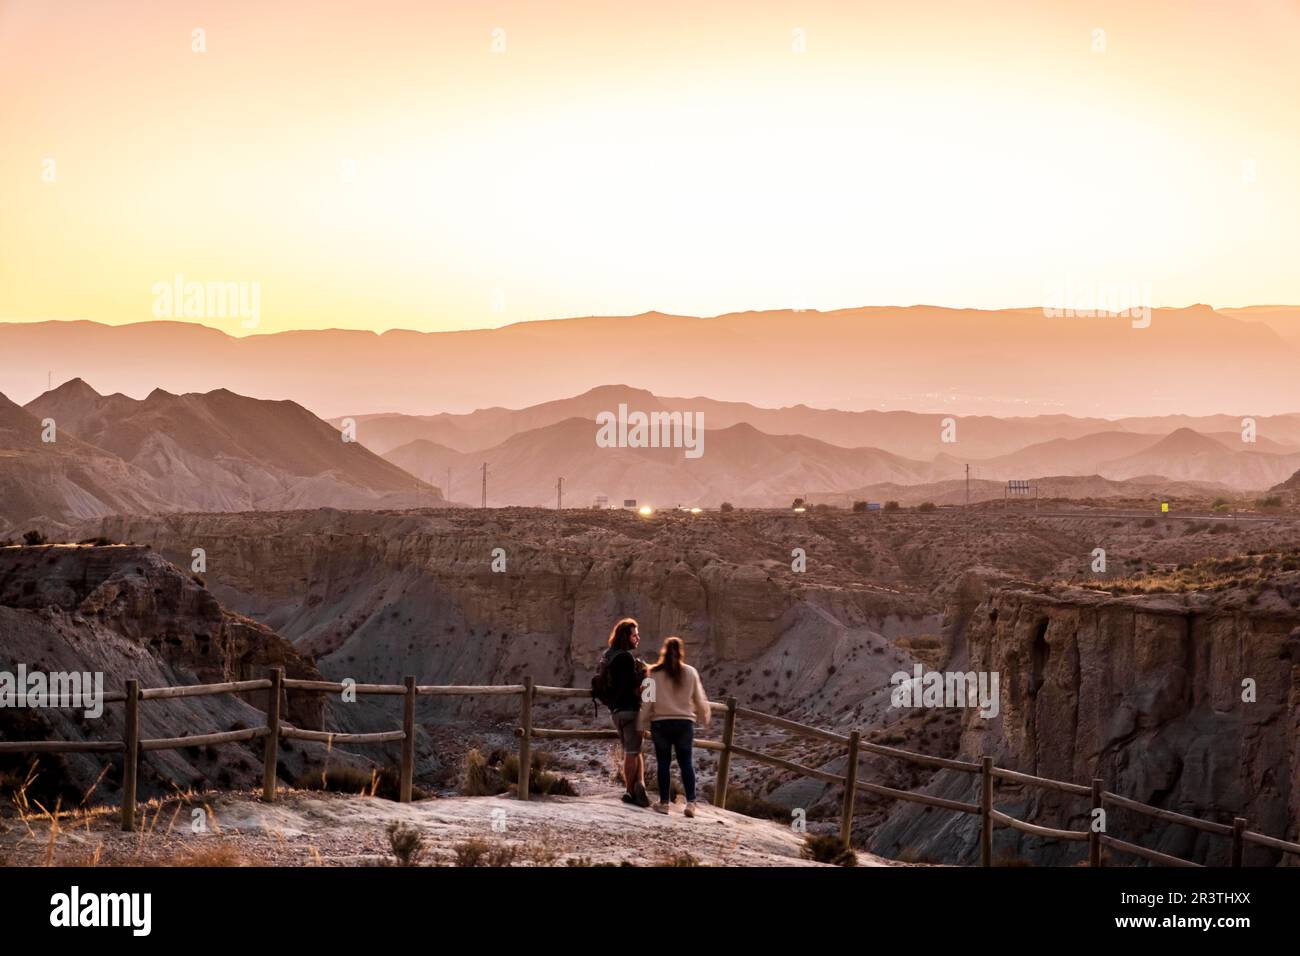 Couple watching the Tabernas Desert (Spanish: Desierto de Tabernas) is one of Spain's semi-arid deserts, located within Spain's south-eastern Stock Photo